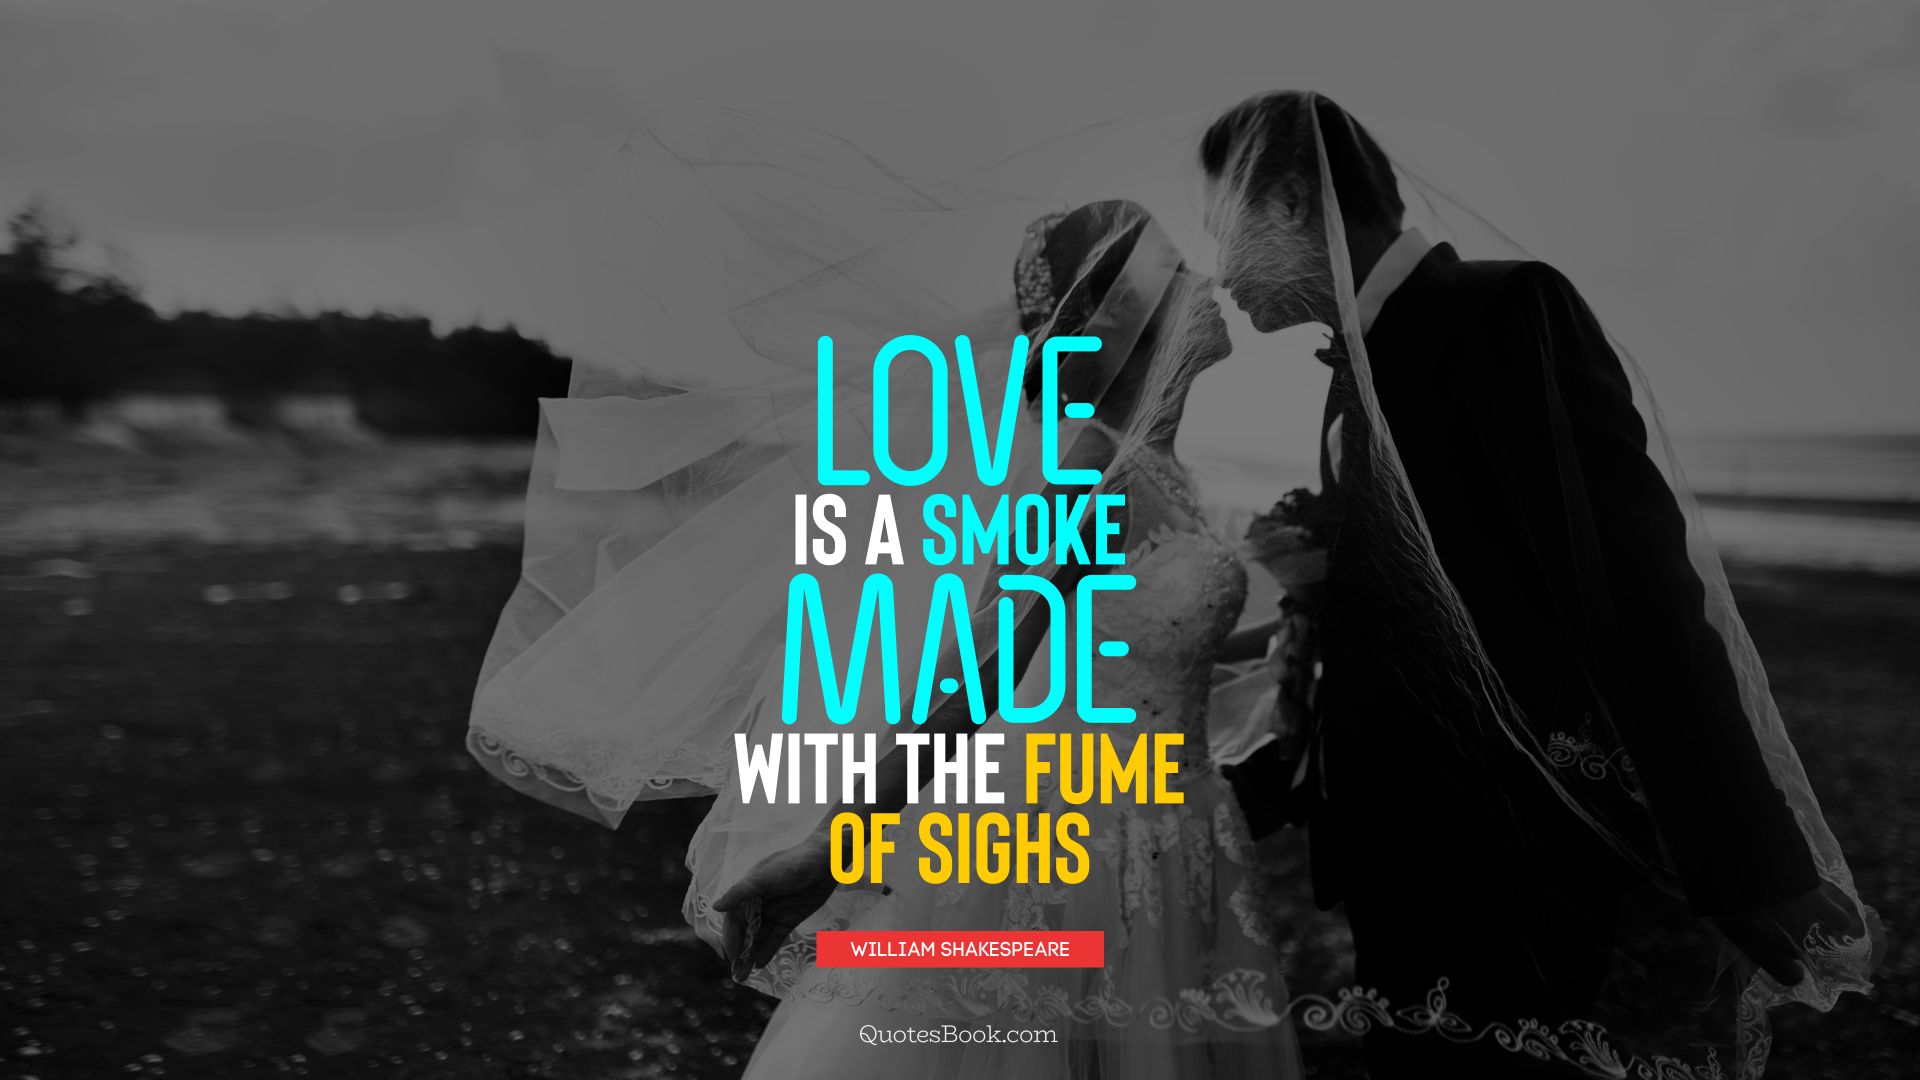 Love is a smoke made with the fume of sighs. - Quote by William Shakespeare